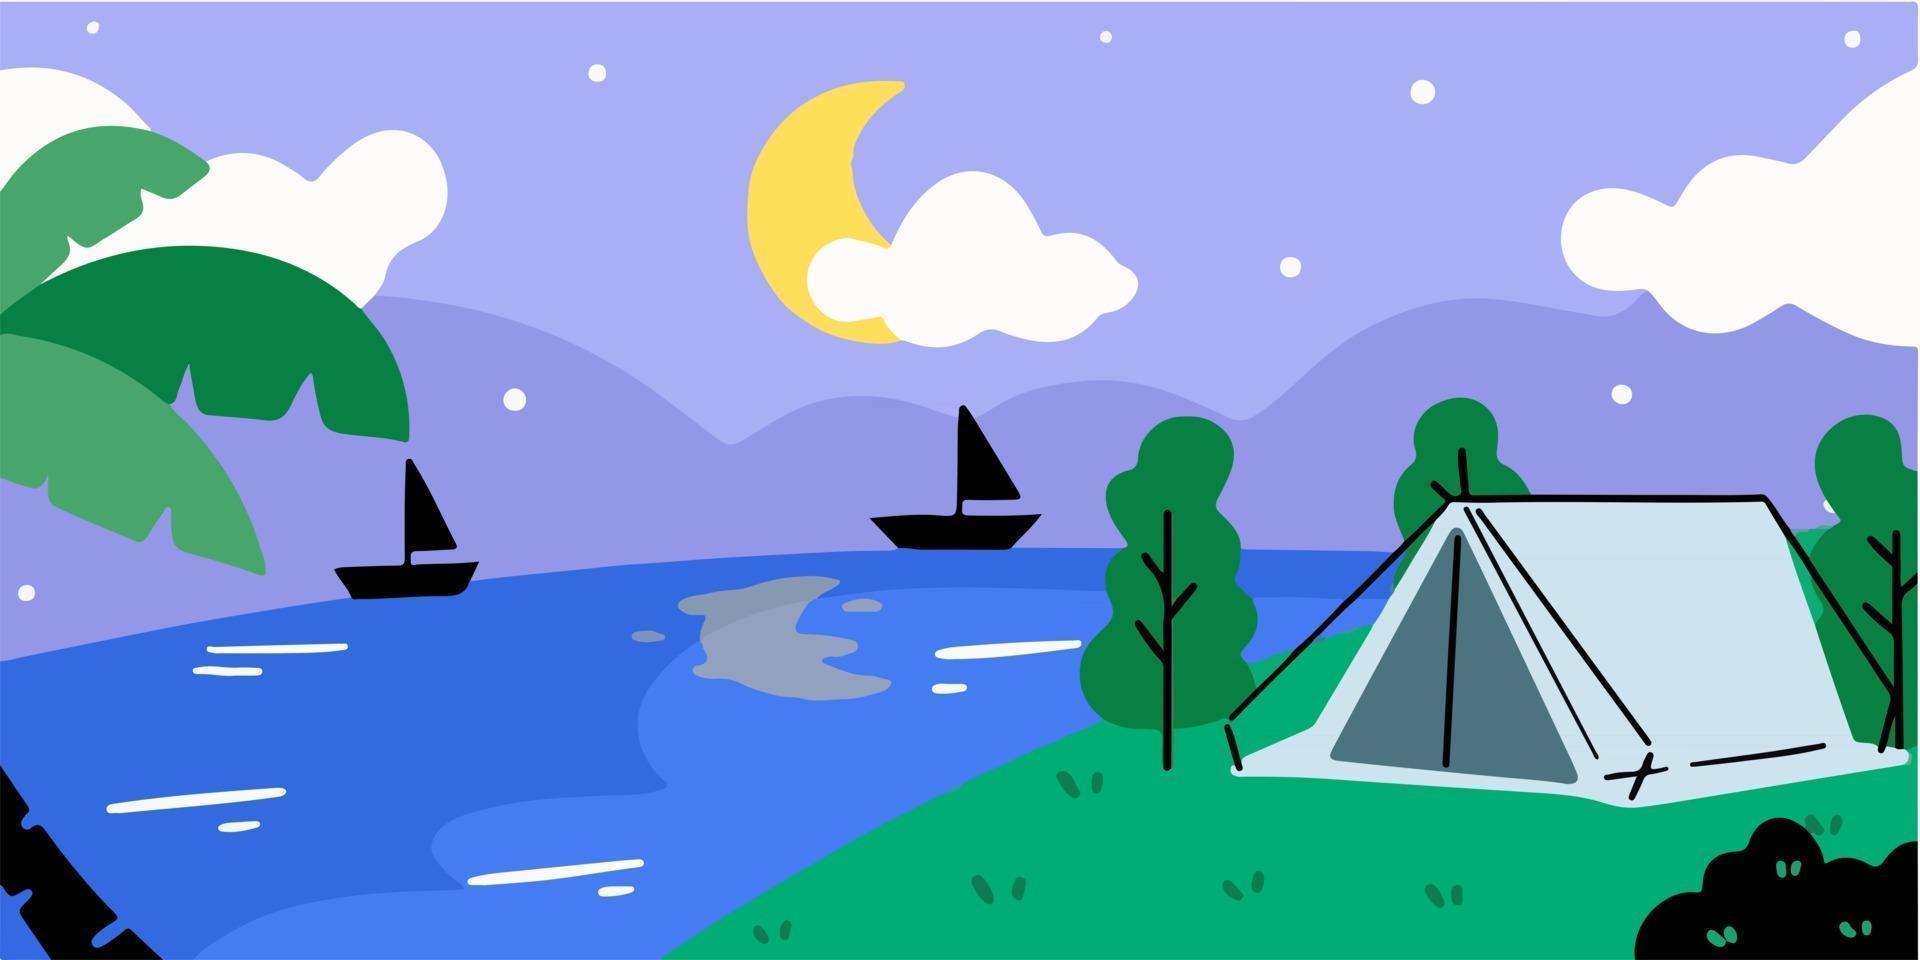 Relaxing Night At Summer Camp Doodle Illustration vector